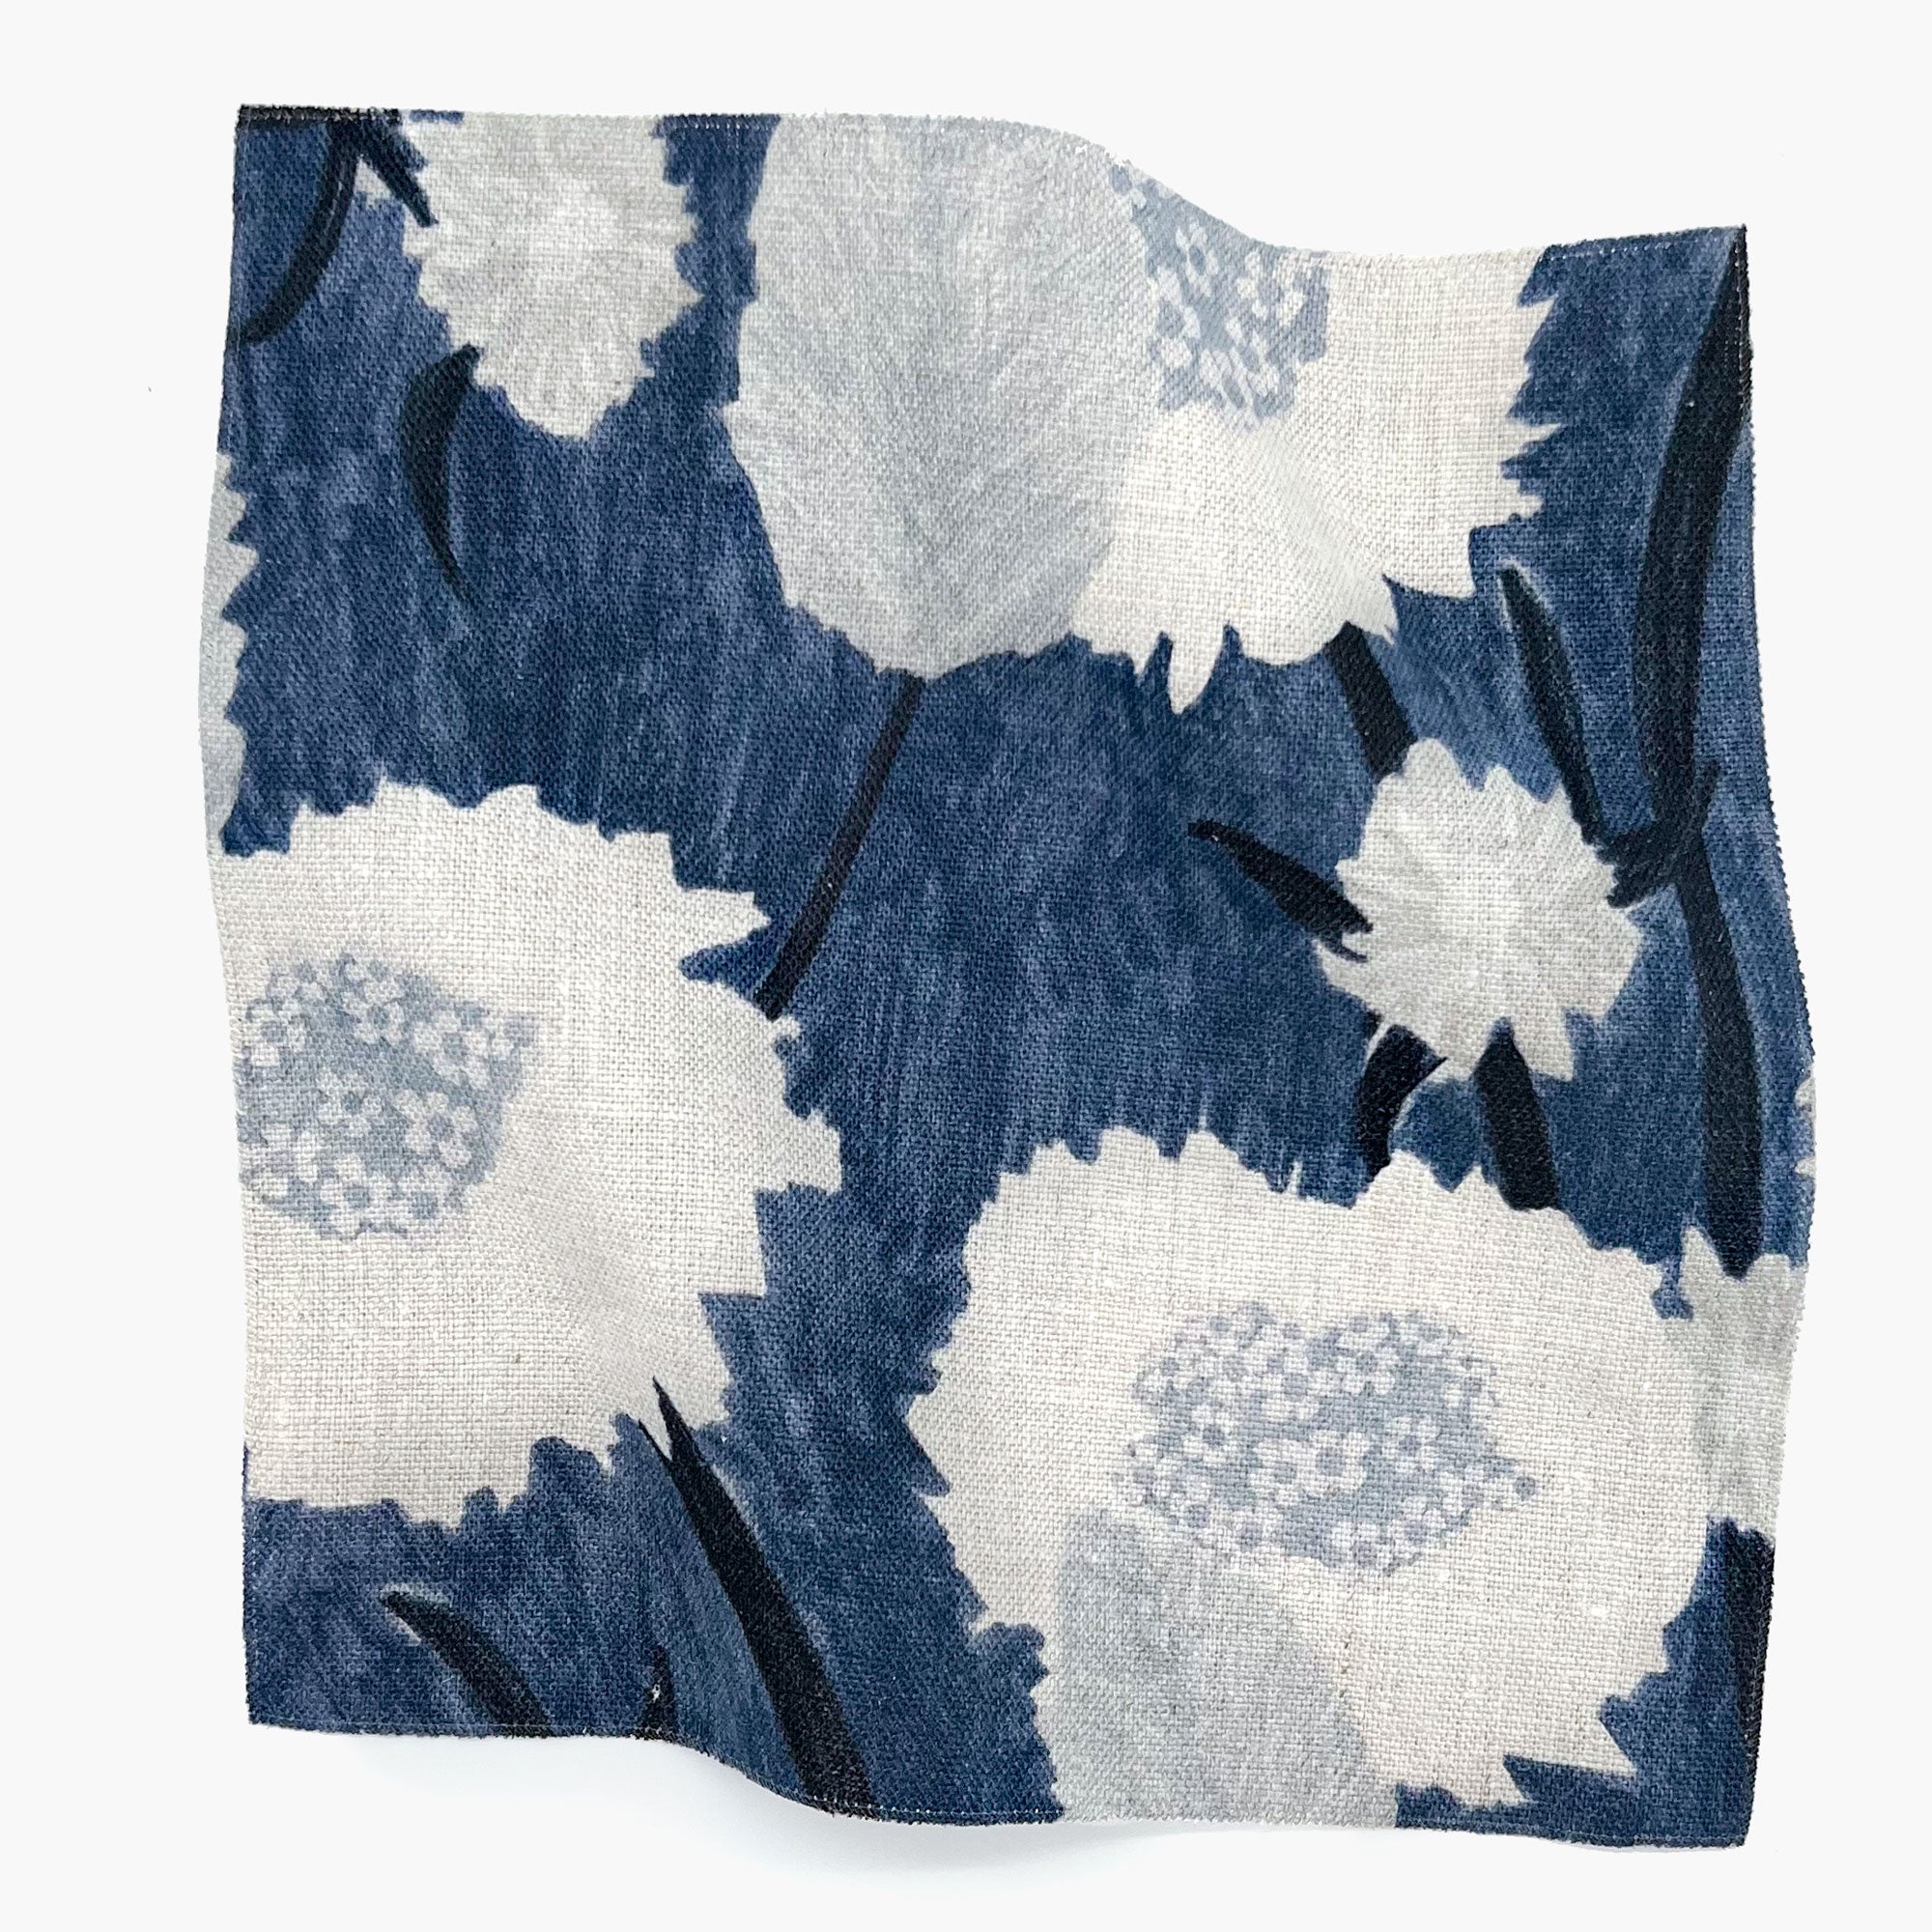 Square fabric swatch in a playful floral print in shades of white and gray on a navy field.